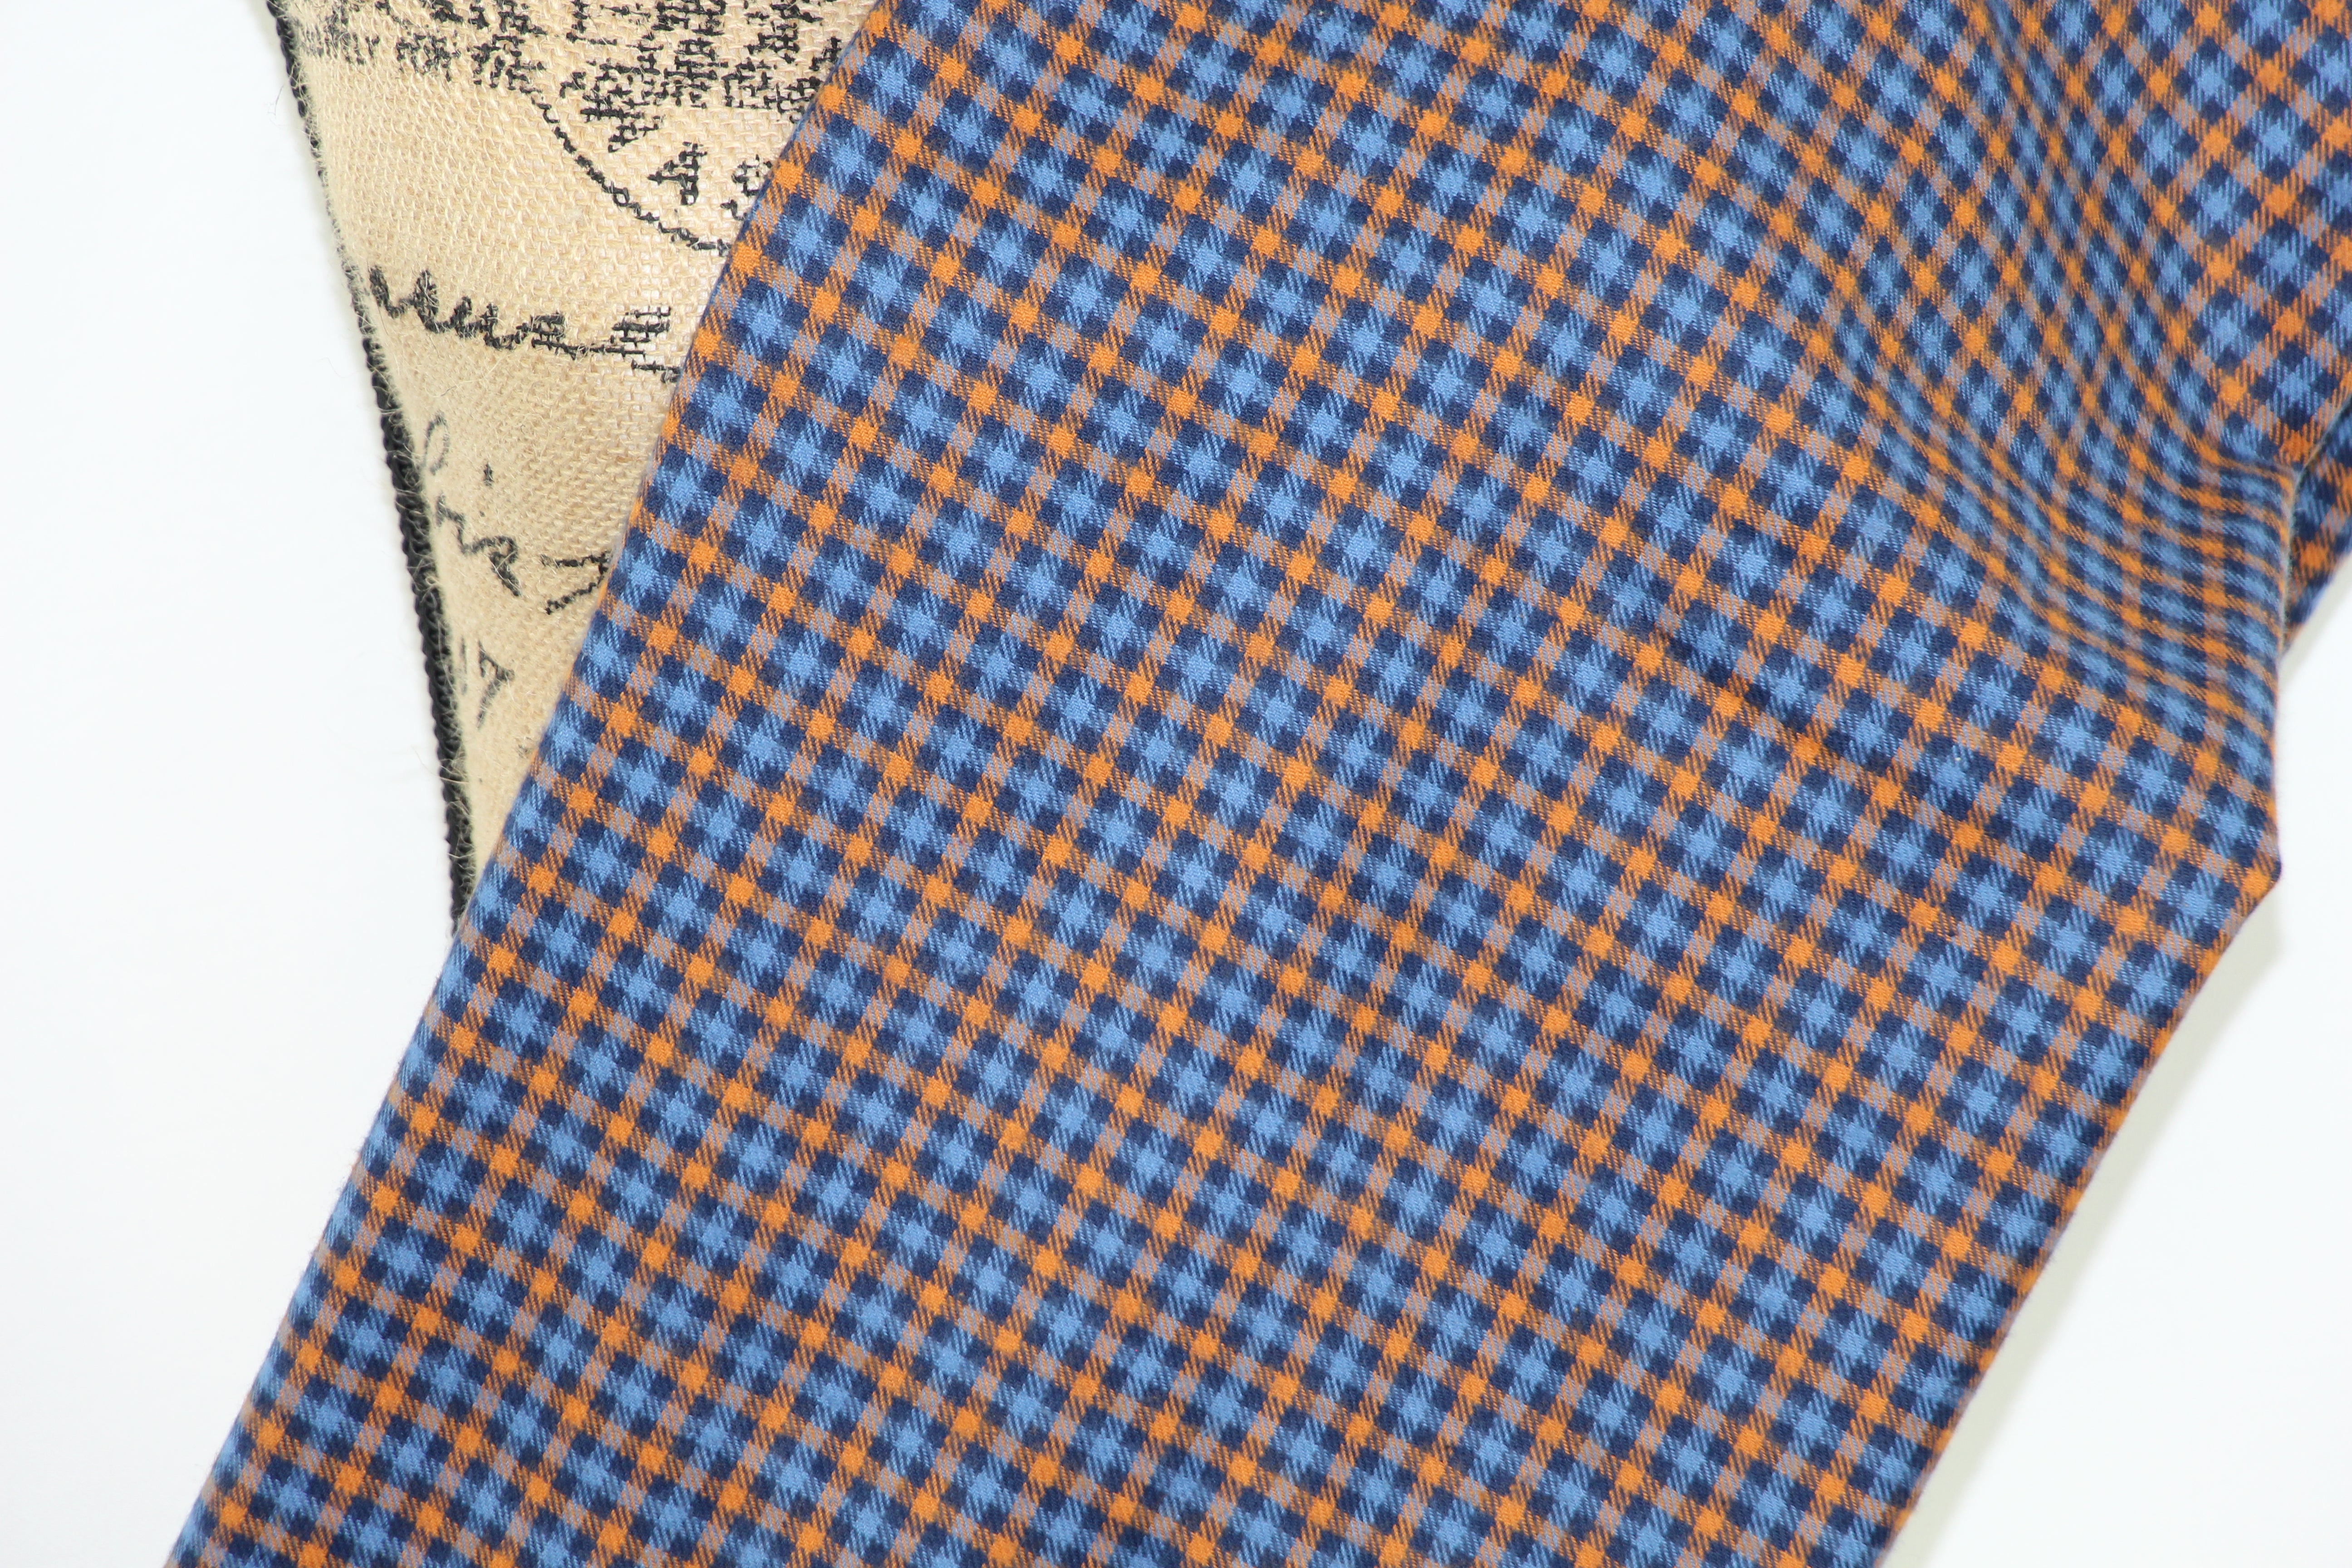 Blue and Orange Gingham Check Plaid Lightweight Flannel Infinity or Blanket Scarf